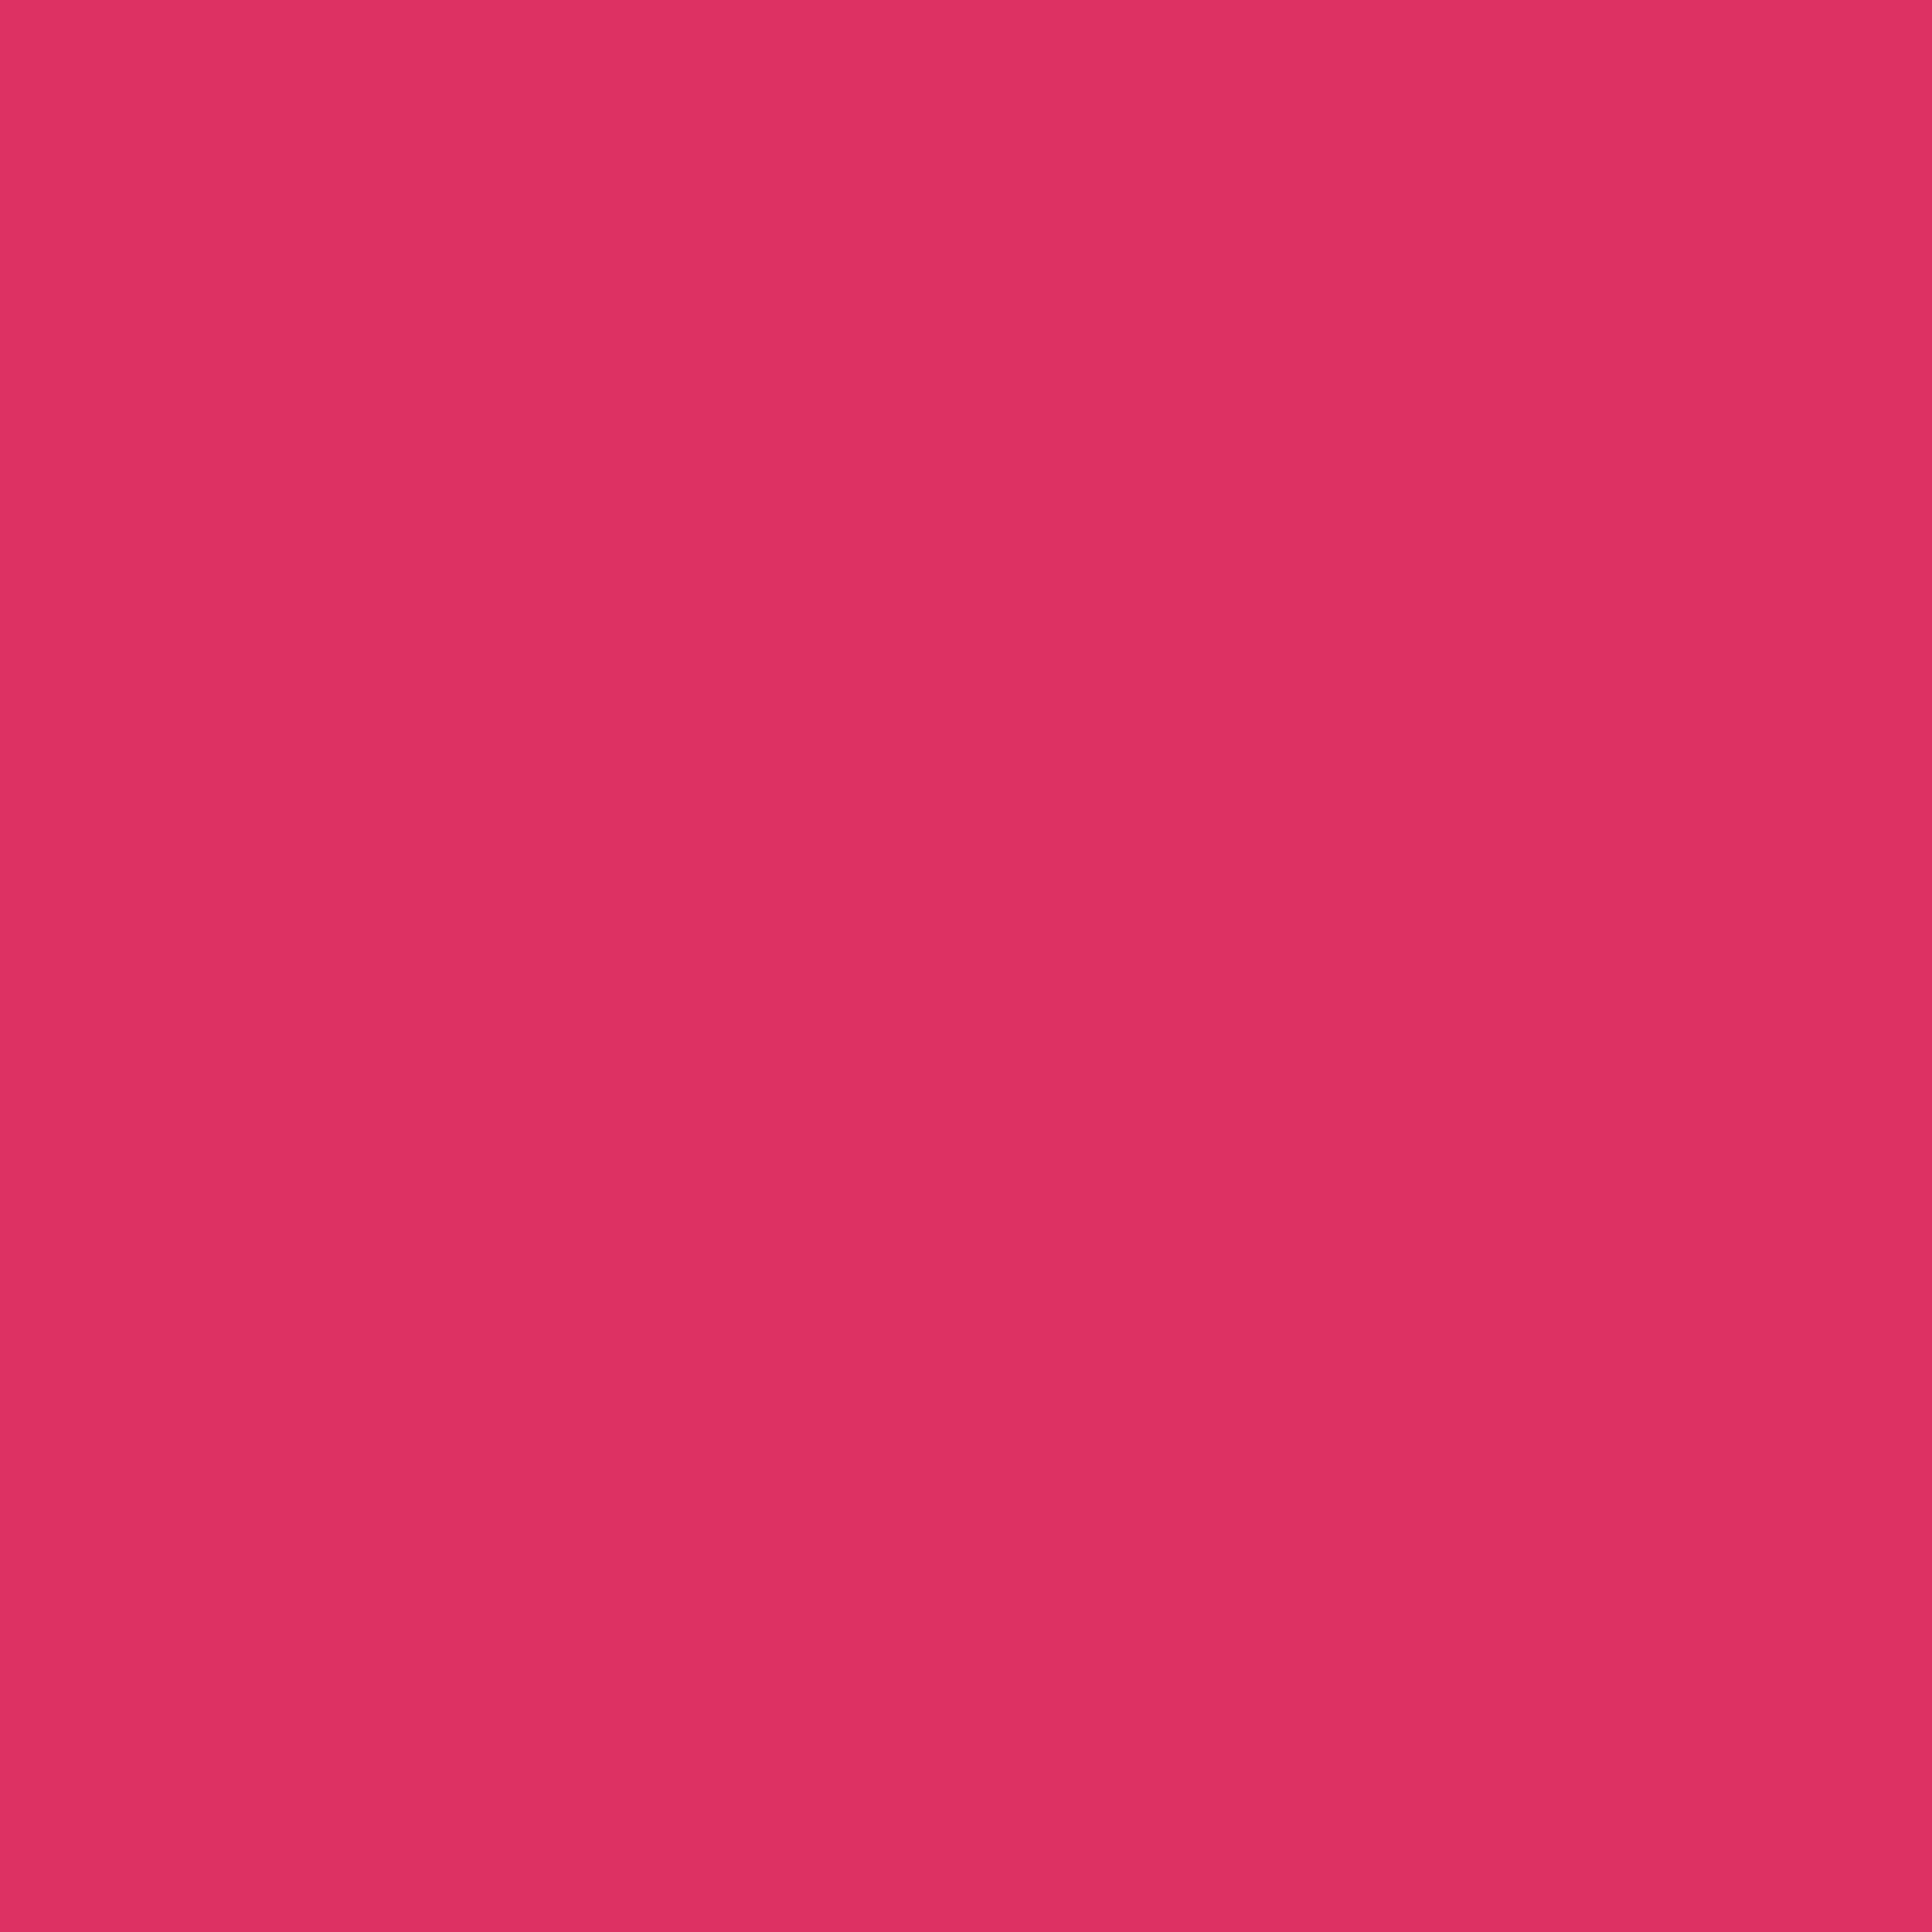 3600x3600 Cherry Solid Color Background